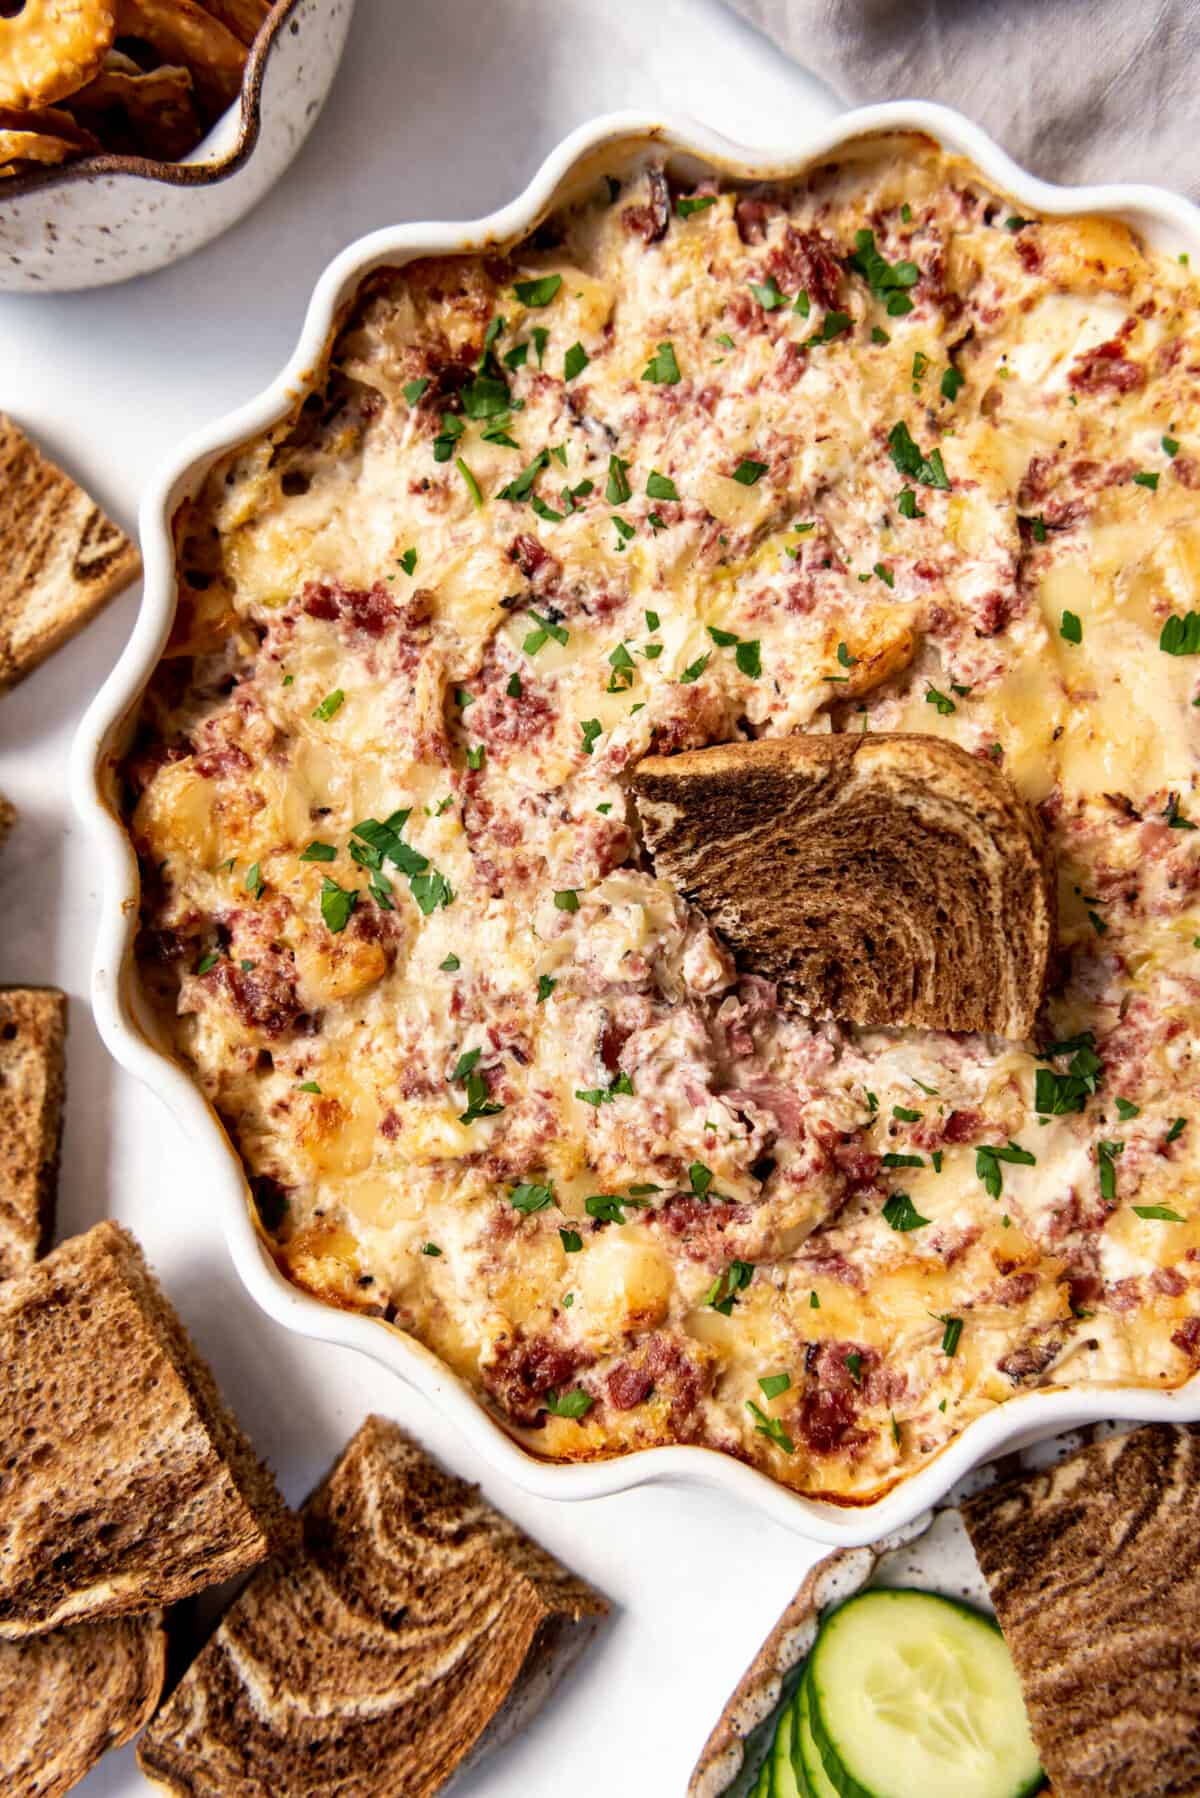 Homemade reuben dip with a piece of marble rye bread in it.